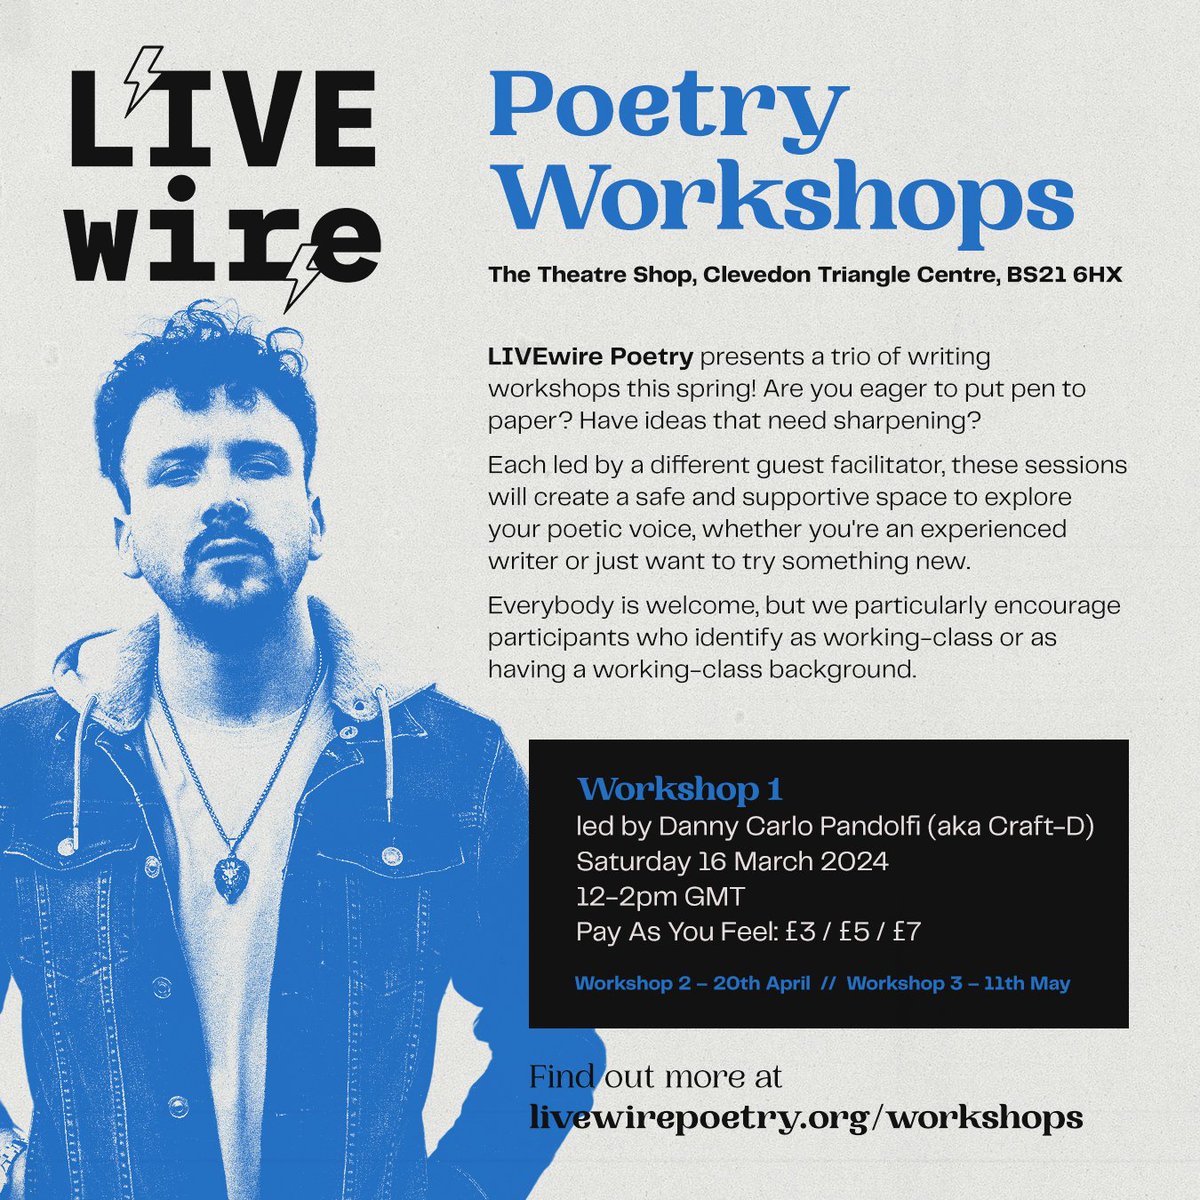 This Saturday in CLEVEDON 👉 a writing workshop at @theatreshopclevedon Come along and start writing some new work with me! OPEN TO ALL. Working-class writers are particularly welcome. Big up @livewirepoetry ⚡ Tix/info: bit.ly/4acwPBc